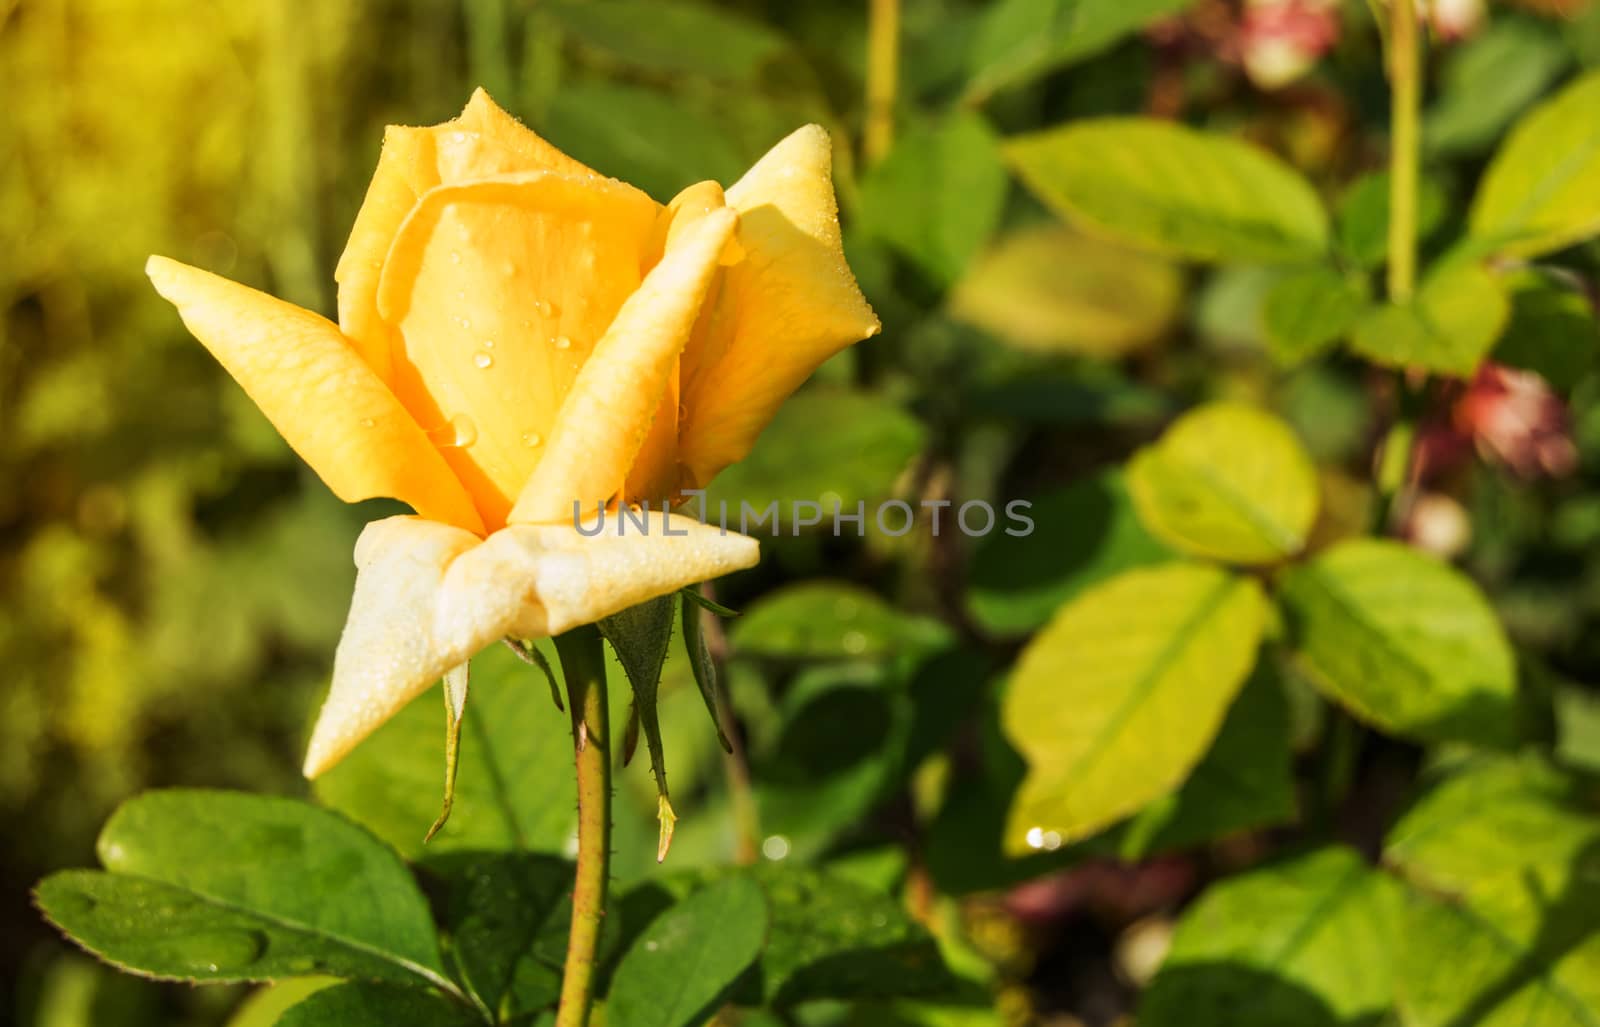 Beautiful yellow rose blooms in the garden background of green leaves and stems, the concept of postcards by claire_lucia